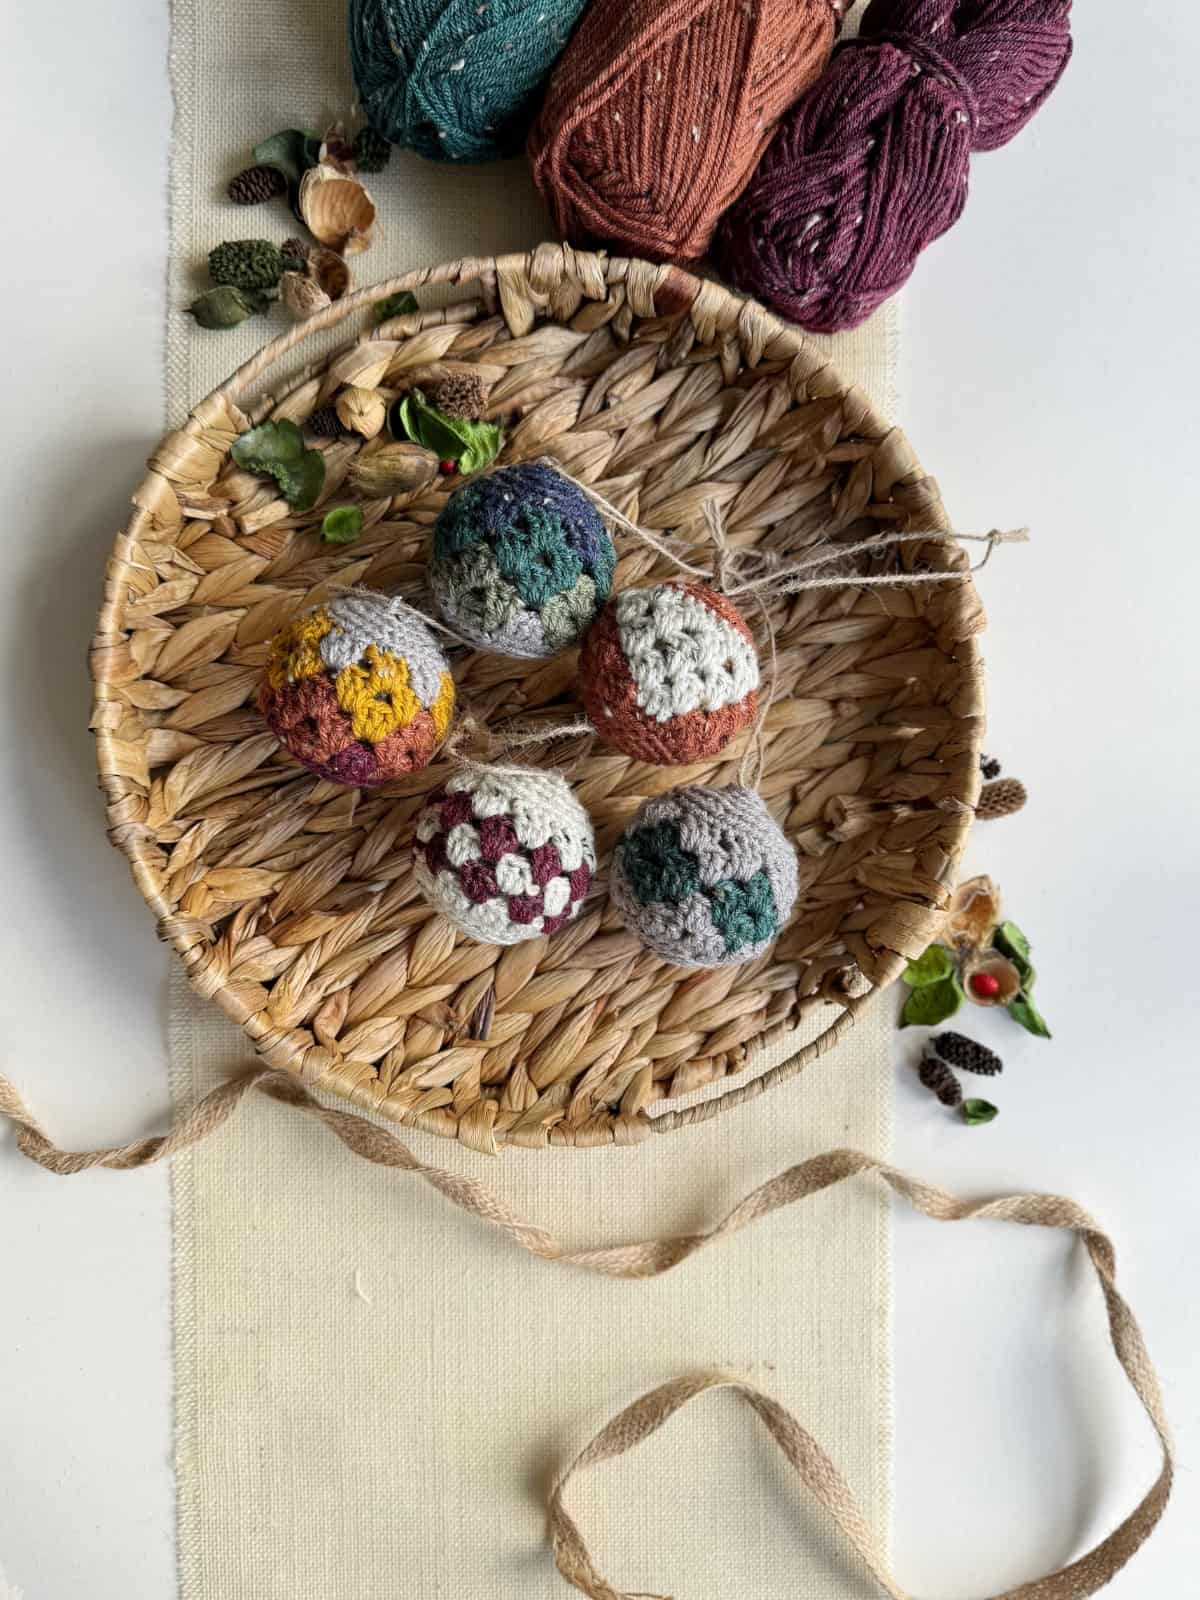 Crocheted balls in a basket on a table.